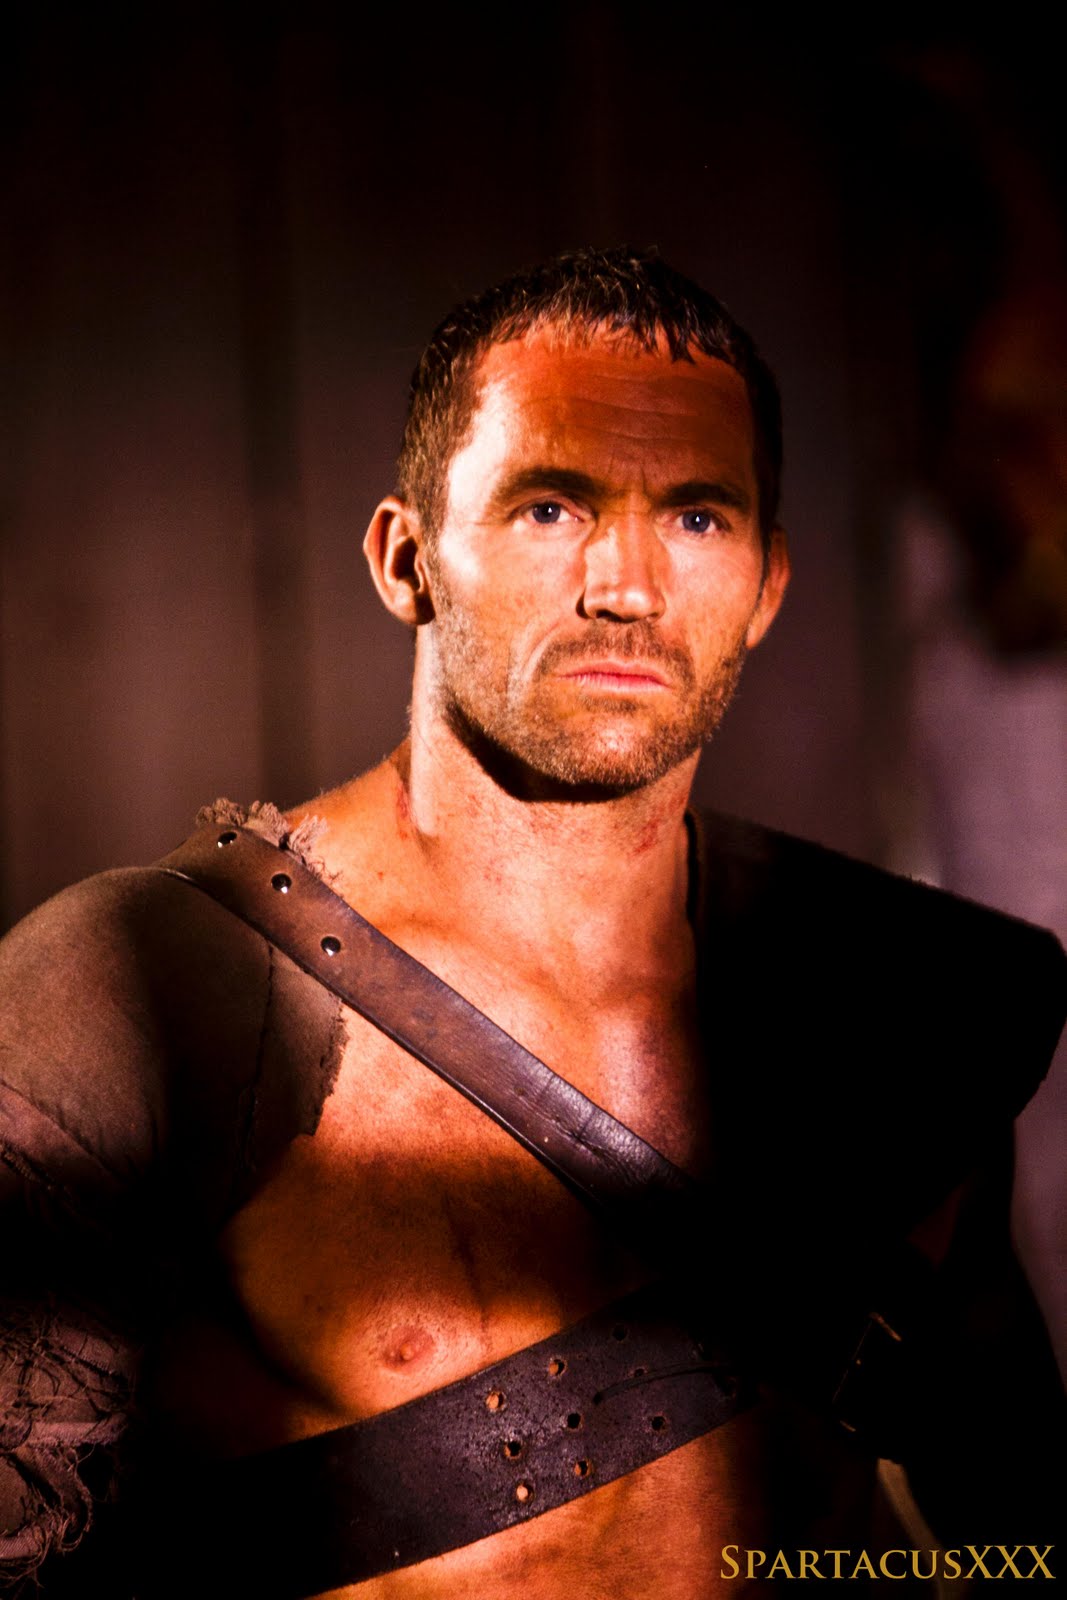 Spartacus Mmxii - The Heartthrob Hero Blog: Interview - Marcus London: Star of ...